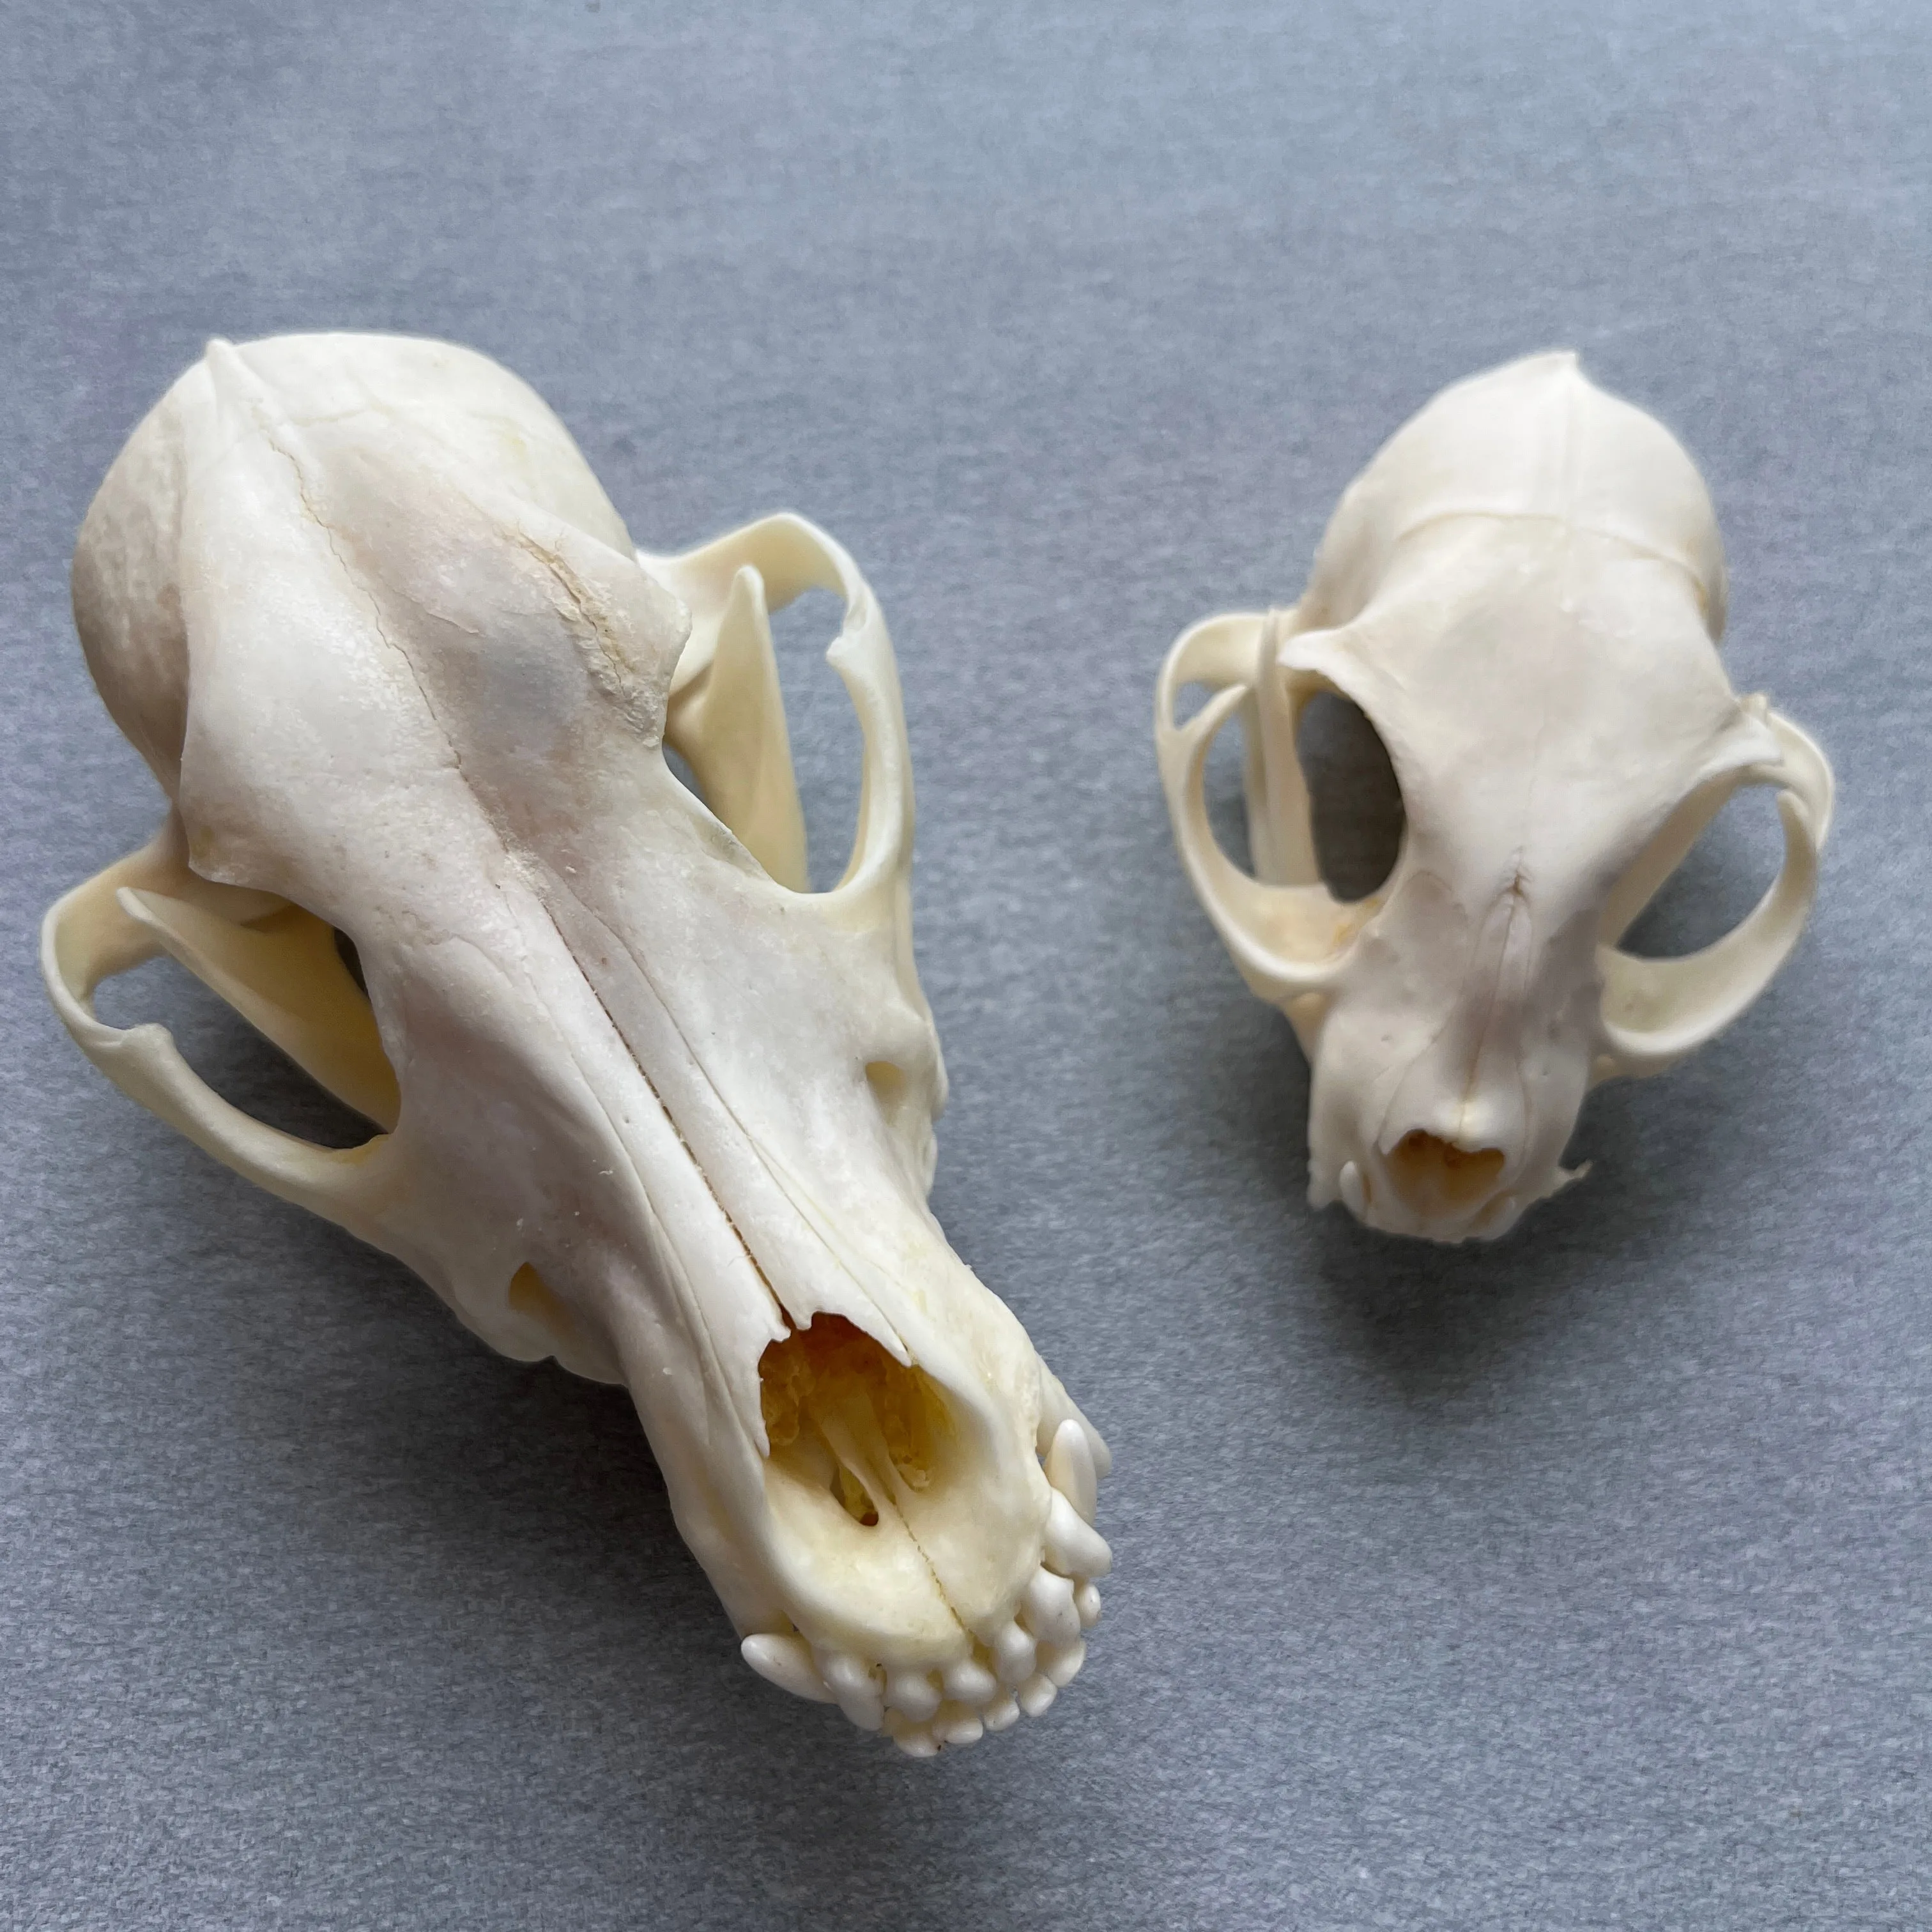 2pcs Taxidermy Combination Real Bone Skull, Bones Real for Craft, Home Decor, Specimen Collectibles Study, Special Gifts